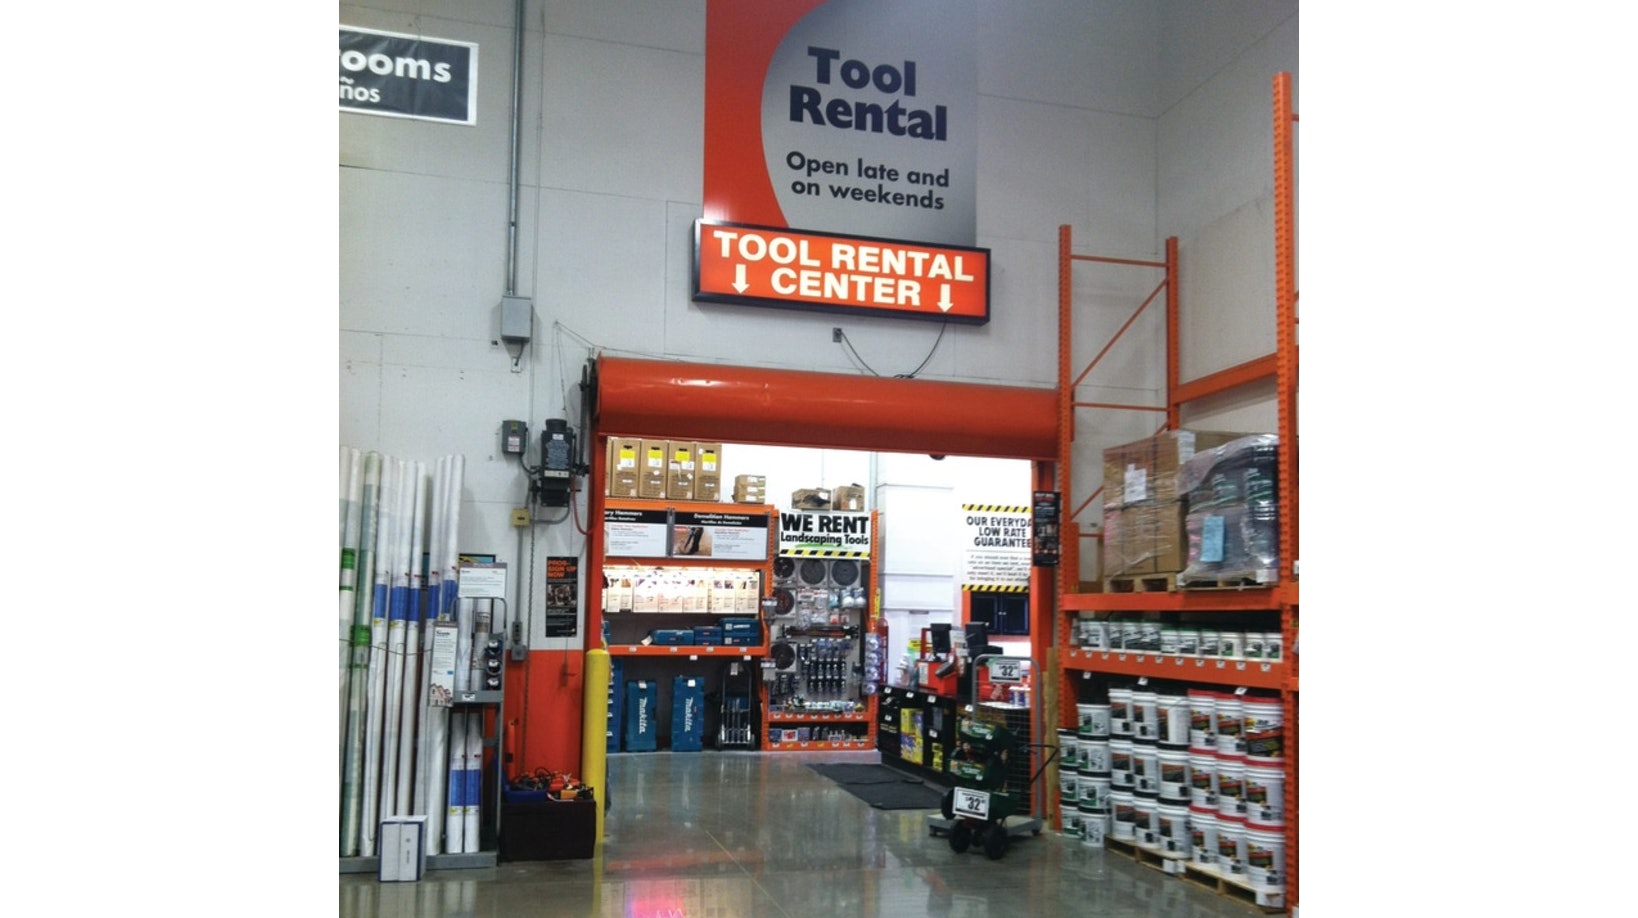 Home Depot Will Invest To Accelerate Tool Rental Growth For Construction Pros